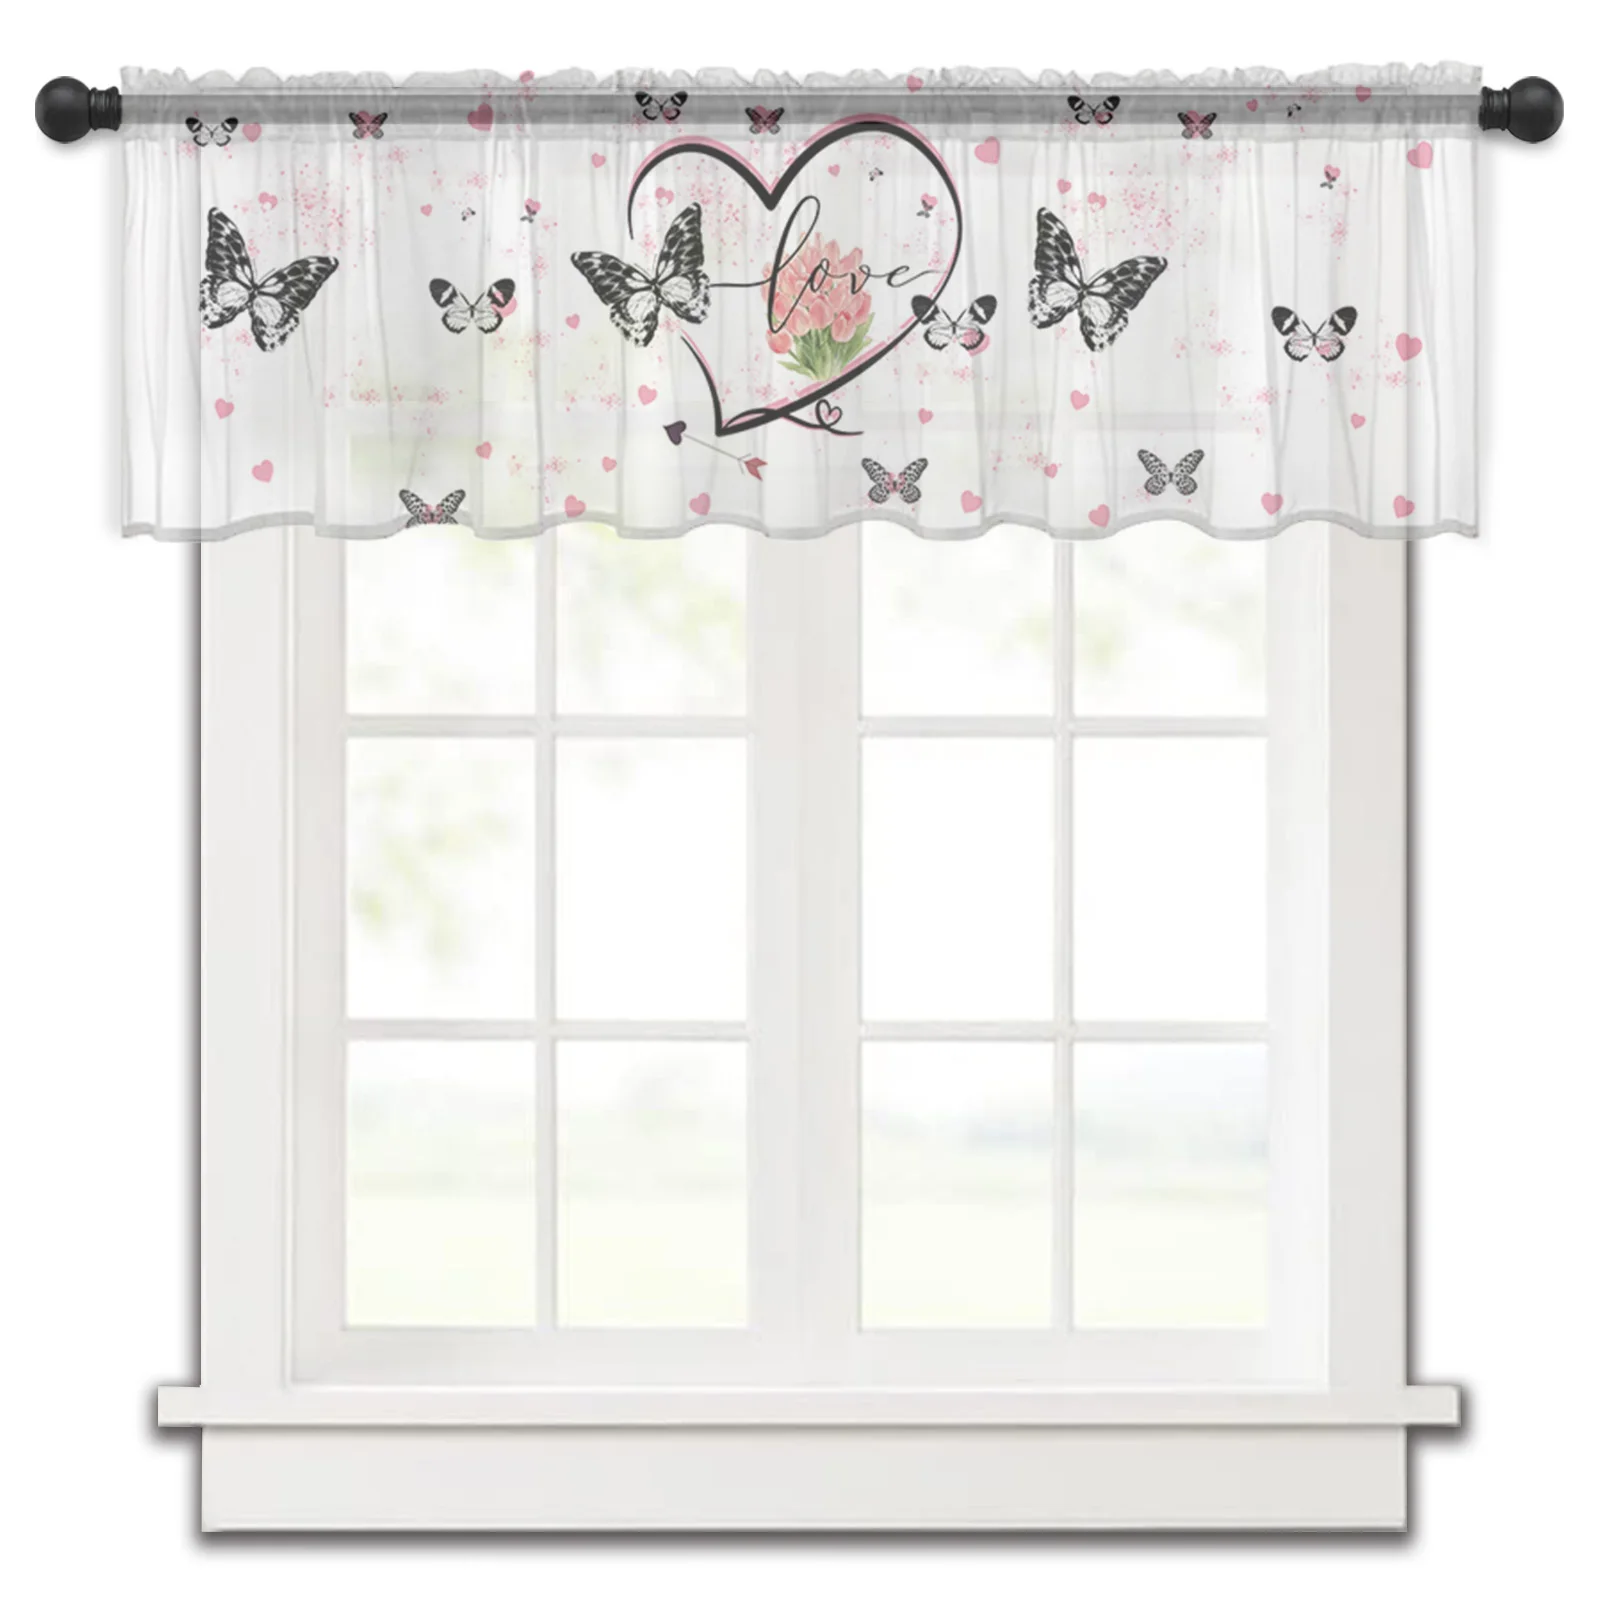 

Valentine'S Day Love Butterflies Flowers Kitchen Curtains Tulle Sheer Short Curtain Bedroom Living Room Home Decor Voile Drapes